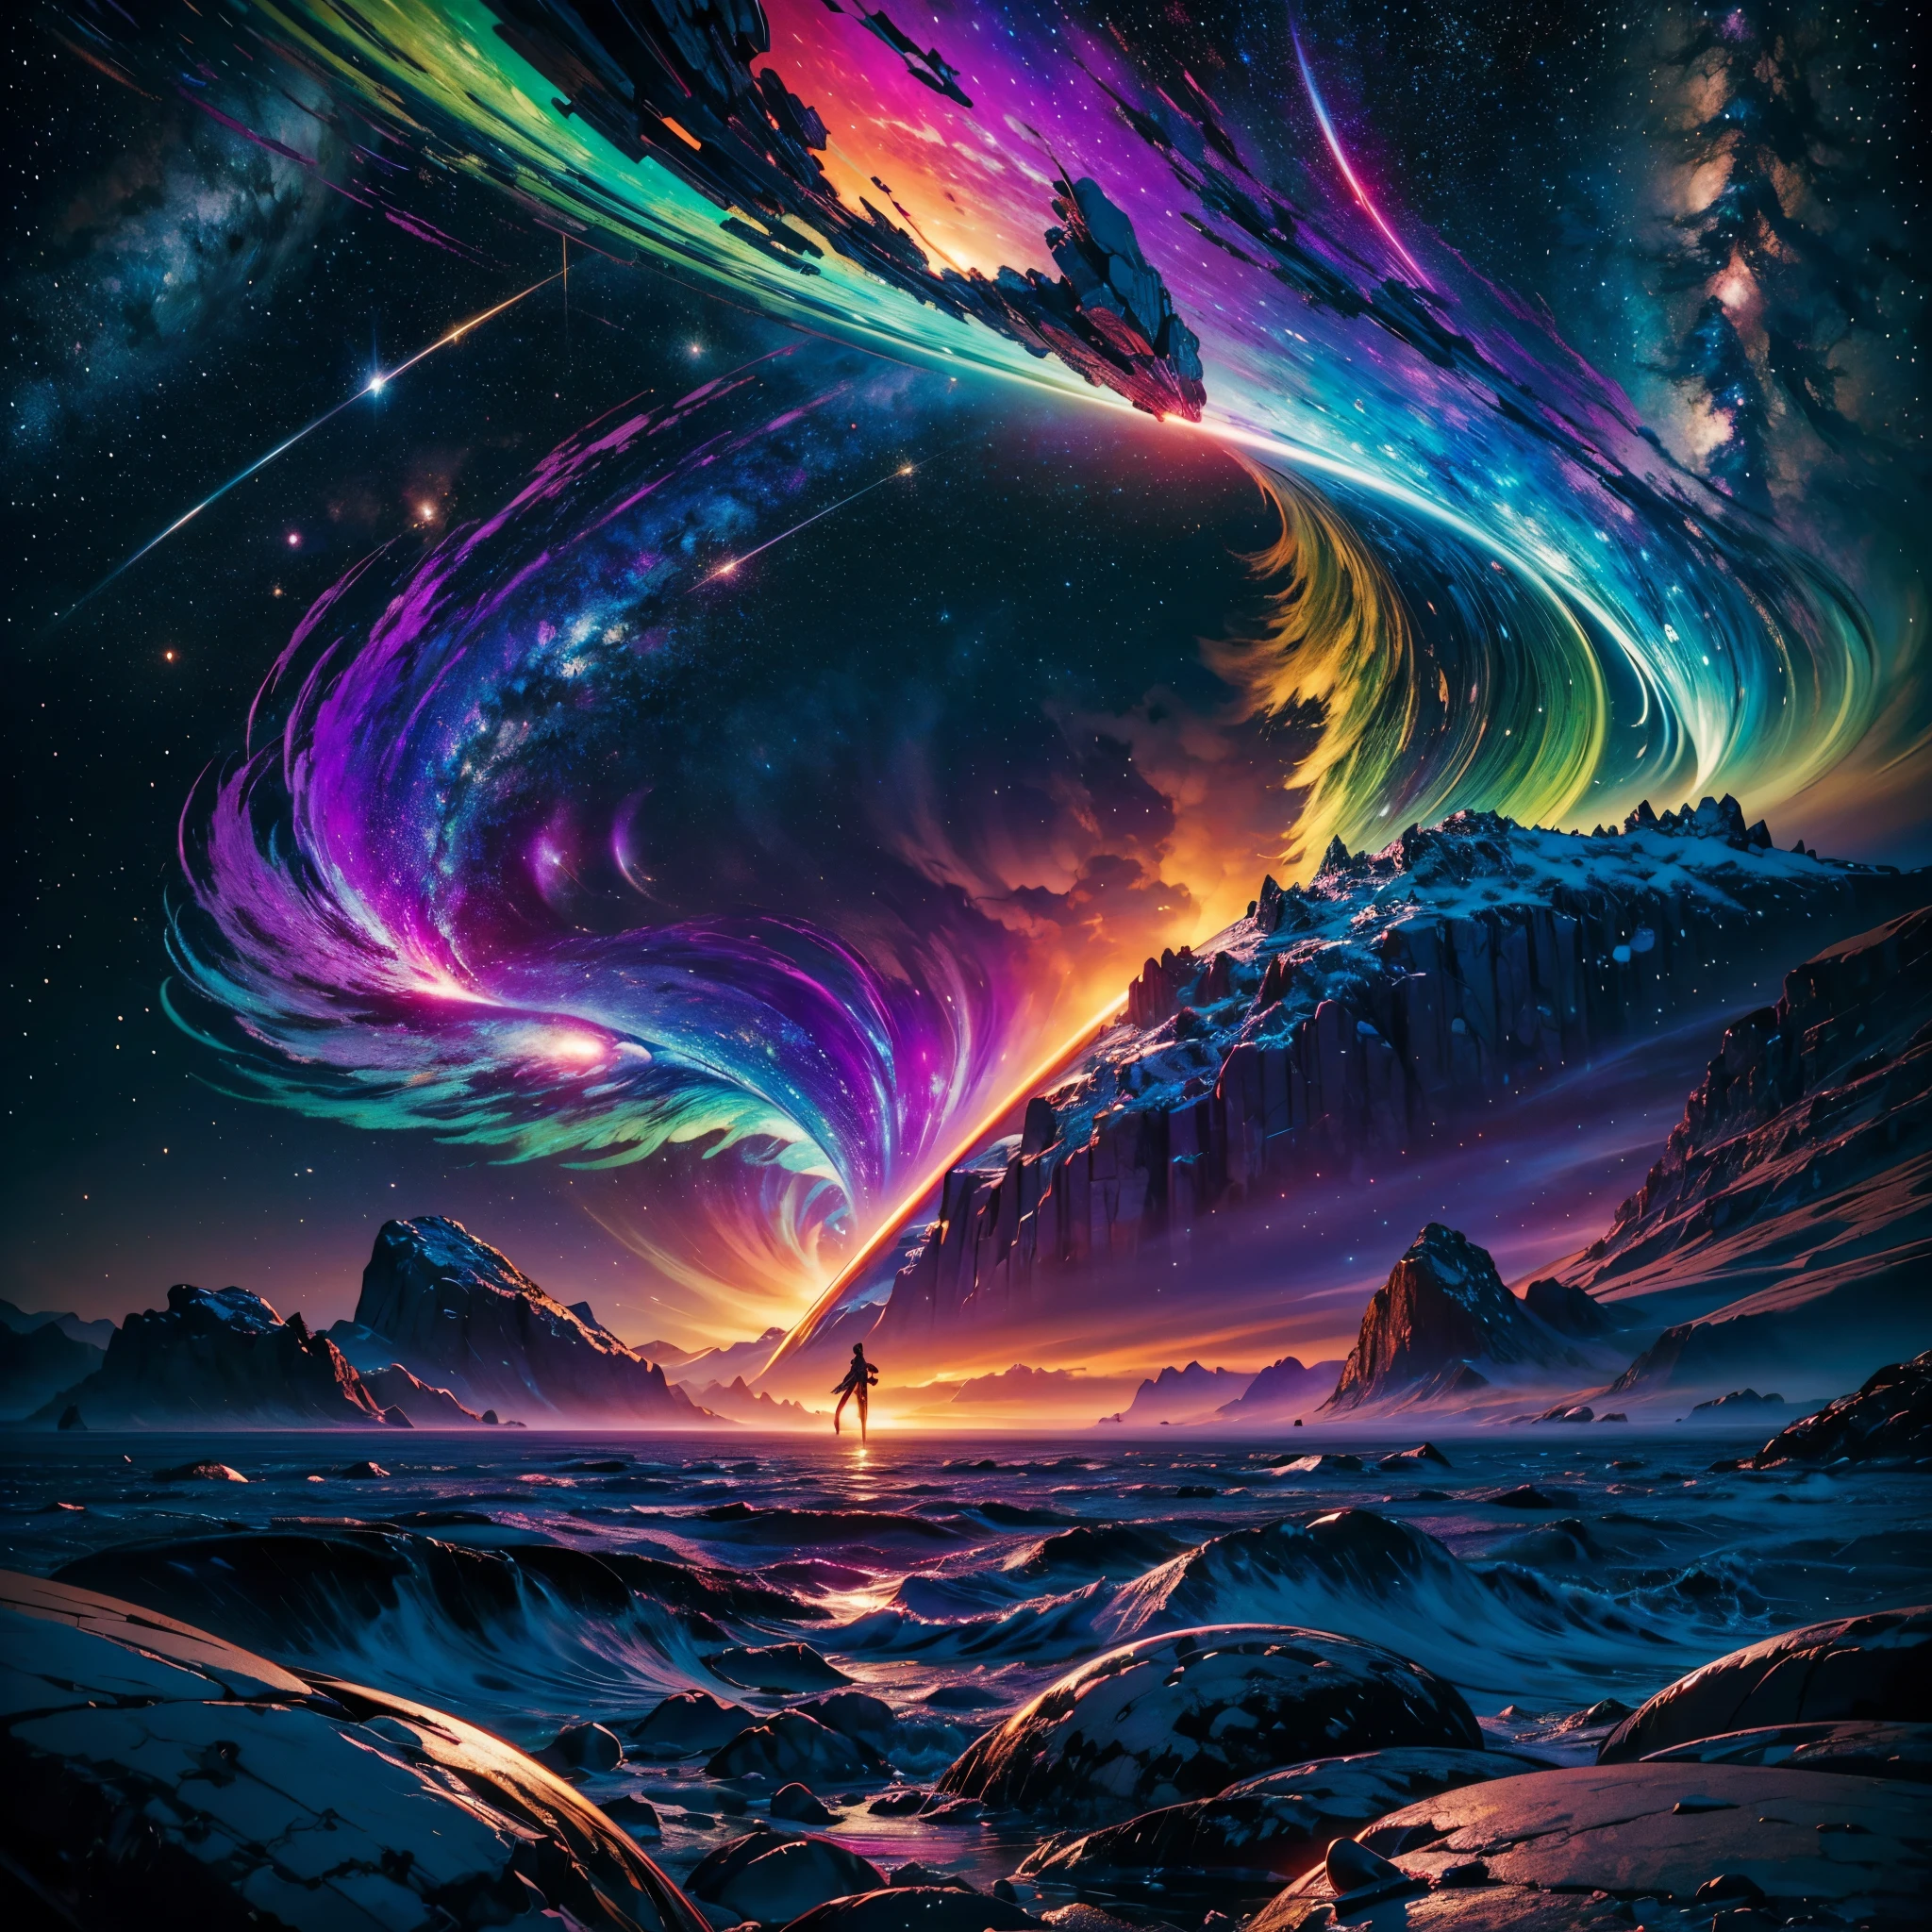 Vibrant Nebulae Octans by_Mappa ((Rain_Color Colorful_liquid_on_naked_body:1.3 Colorful_body Colorful_ink_on_hair:1.2 sunset Rainbow Abundant_colorful_liquids White_liquid fullbodye wet_Color_liquid)) In the vast expanse of the cosmos, a breathtaking image unfolds before your eyes. In the heart of a starry galaxy, vibrant nebula dance and swirl, their ethereal colors blending and intertwining. The scene is a symphony of cosmic beauty, with tendrils of interstellar dust and gas reaching out into the void. The stars shine with an otherworldly brilliance, illuminating the cosmic tapestry that stretches across the vastness of space. It is a visual feast for the senses, an awe-inspiring glimpse into the wonders of the universe. BREAK,Detailed,Realistic, highly detailed digital art,octane render, bioluminescent, BREAK,by Mappa studios,masterpiece,best quality,official art,illustration,ligne claire,(cool_color),perfect composition,absurdres, fantasy,focused,rule of thirds masterpiece meticulously intricate ultra_high-details extreme improved ultra_high-quality ultra_high-res ultra_photo-realistic optimal ultra_sharpness perfection accurate volumetric SunLight Lightning_contrast global_illumination cgi vfx sfx reflex Octane_rendered ultra_high-def UHD XT3 DSLR HDR romm rgb pbr 3dcg fxaa blu-ray vivid colors-coded anti-aliasing fkaa txaa rtx ssao opengl-shaders glsl-shaders post-processing post-production cell-shading tone-mapping ❤luminescence Heart glow hearth Crystalline earth varies multi etc. --s 1000 --c 20 --q 20 --chaos 100